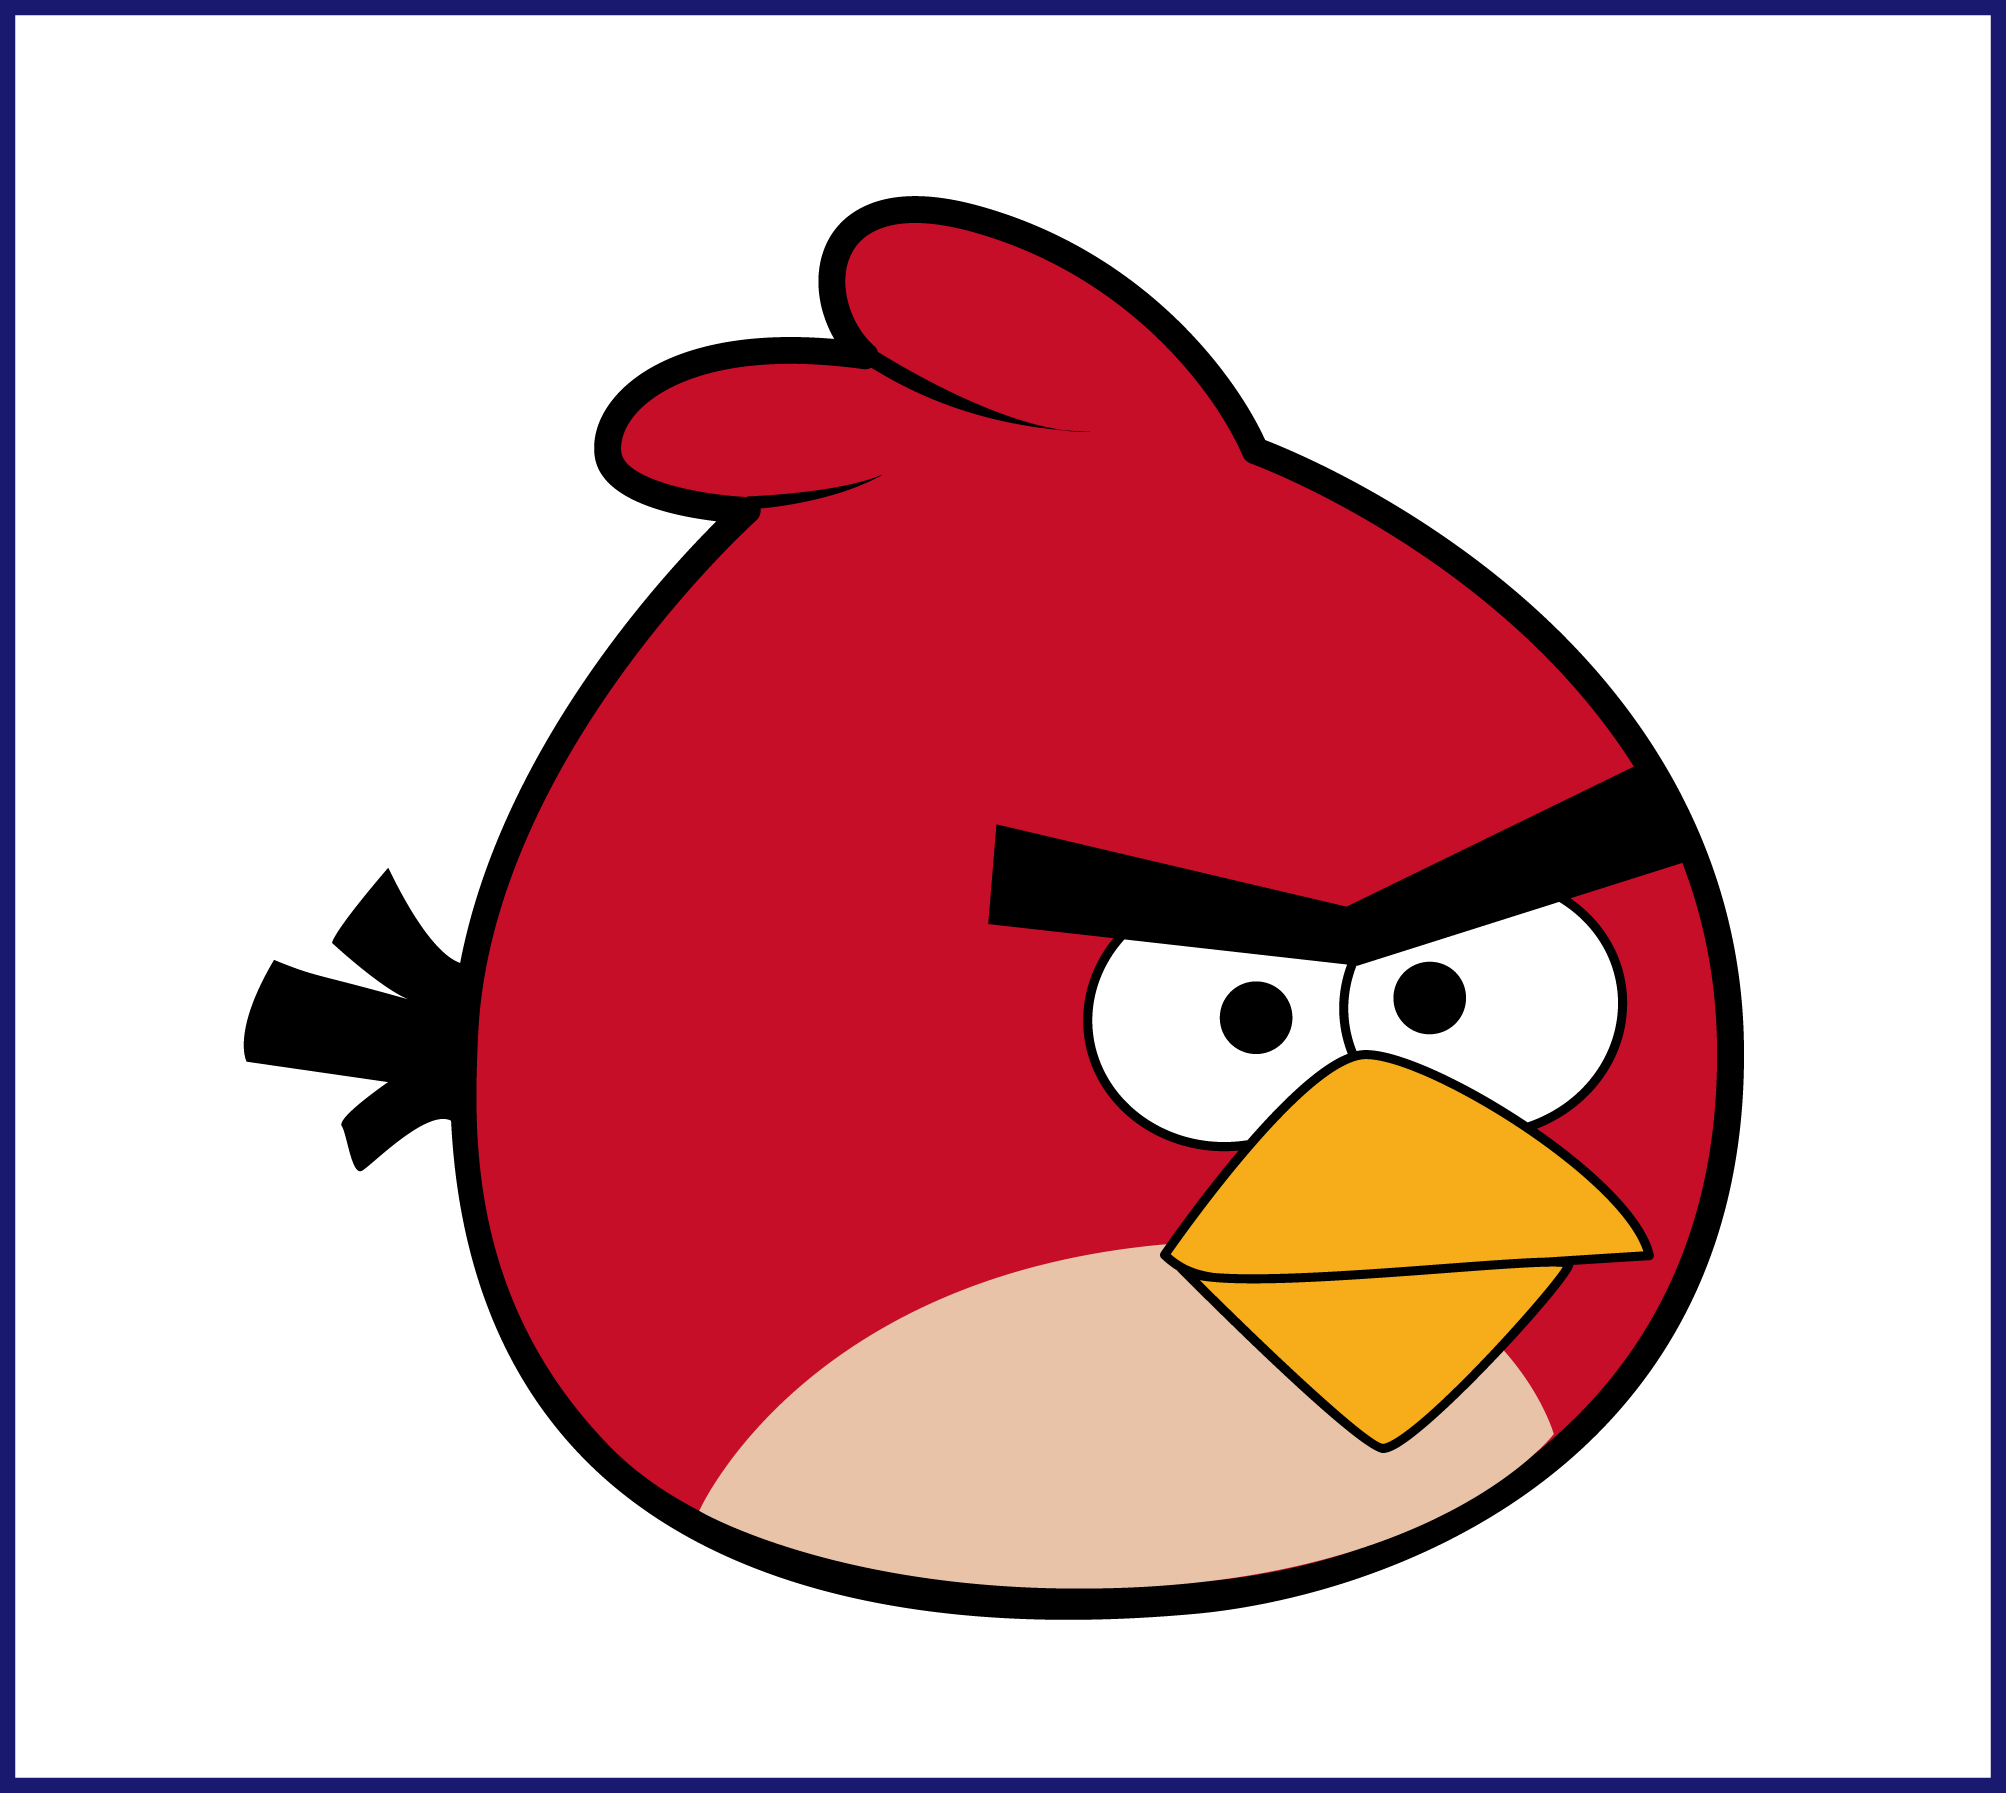 Appealing All Things Angry Too From Dealwisemommy Net - Big Red Angry Bird (2006x1793)